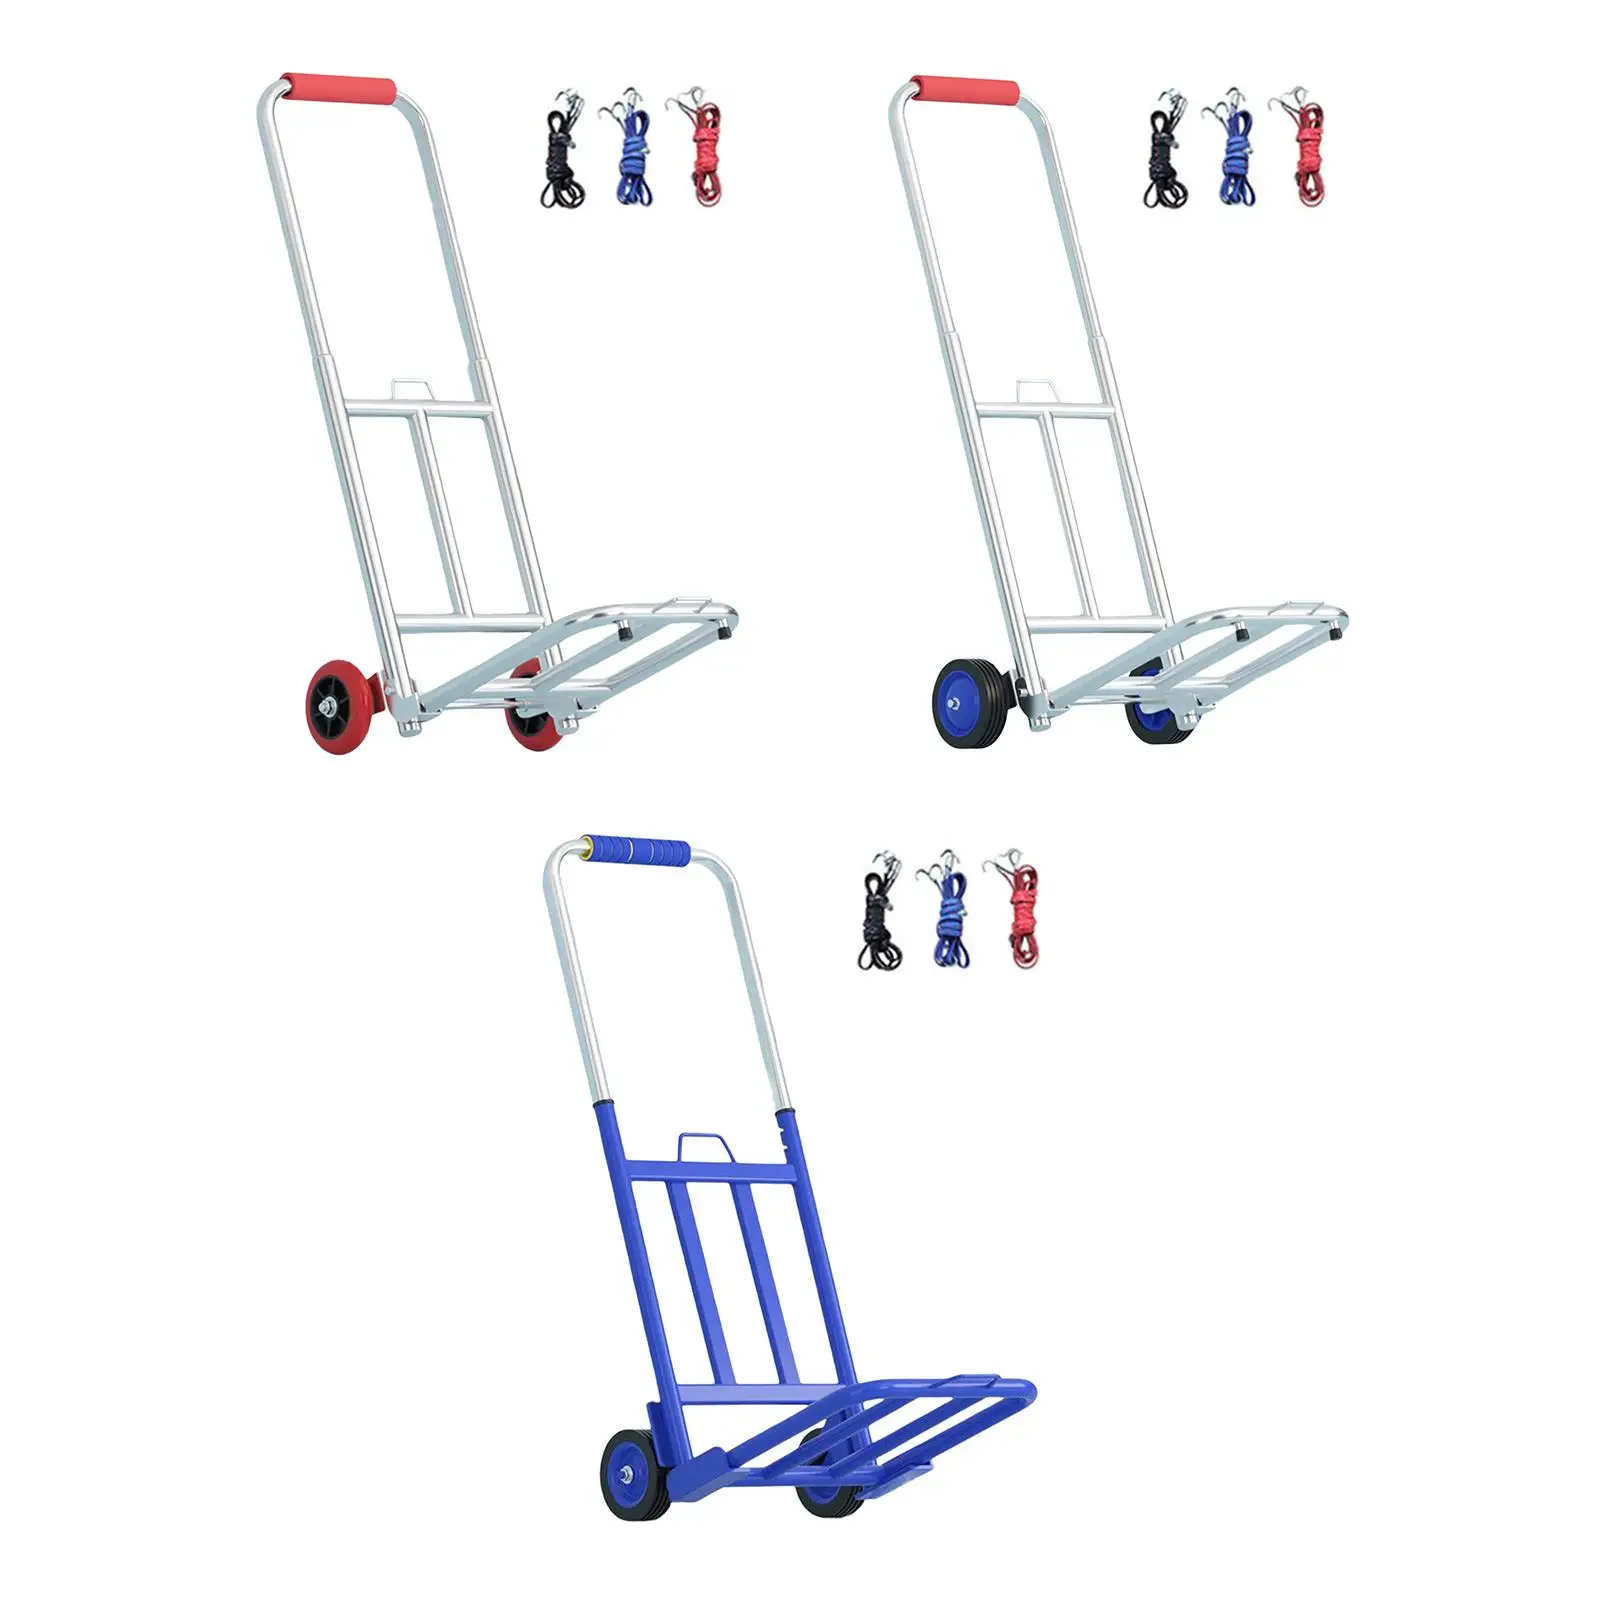 Luggage Cart Compact Luggage Trolley Cart for Transportation Moving Shopping